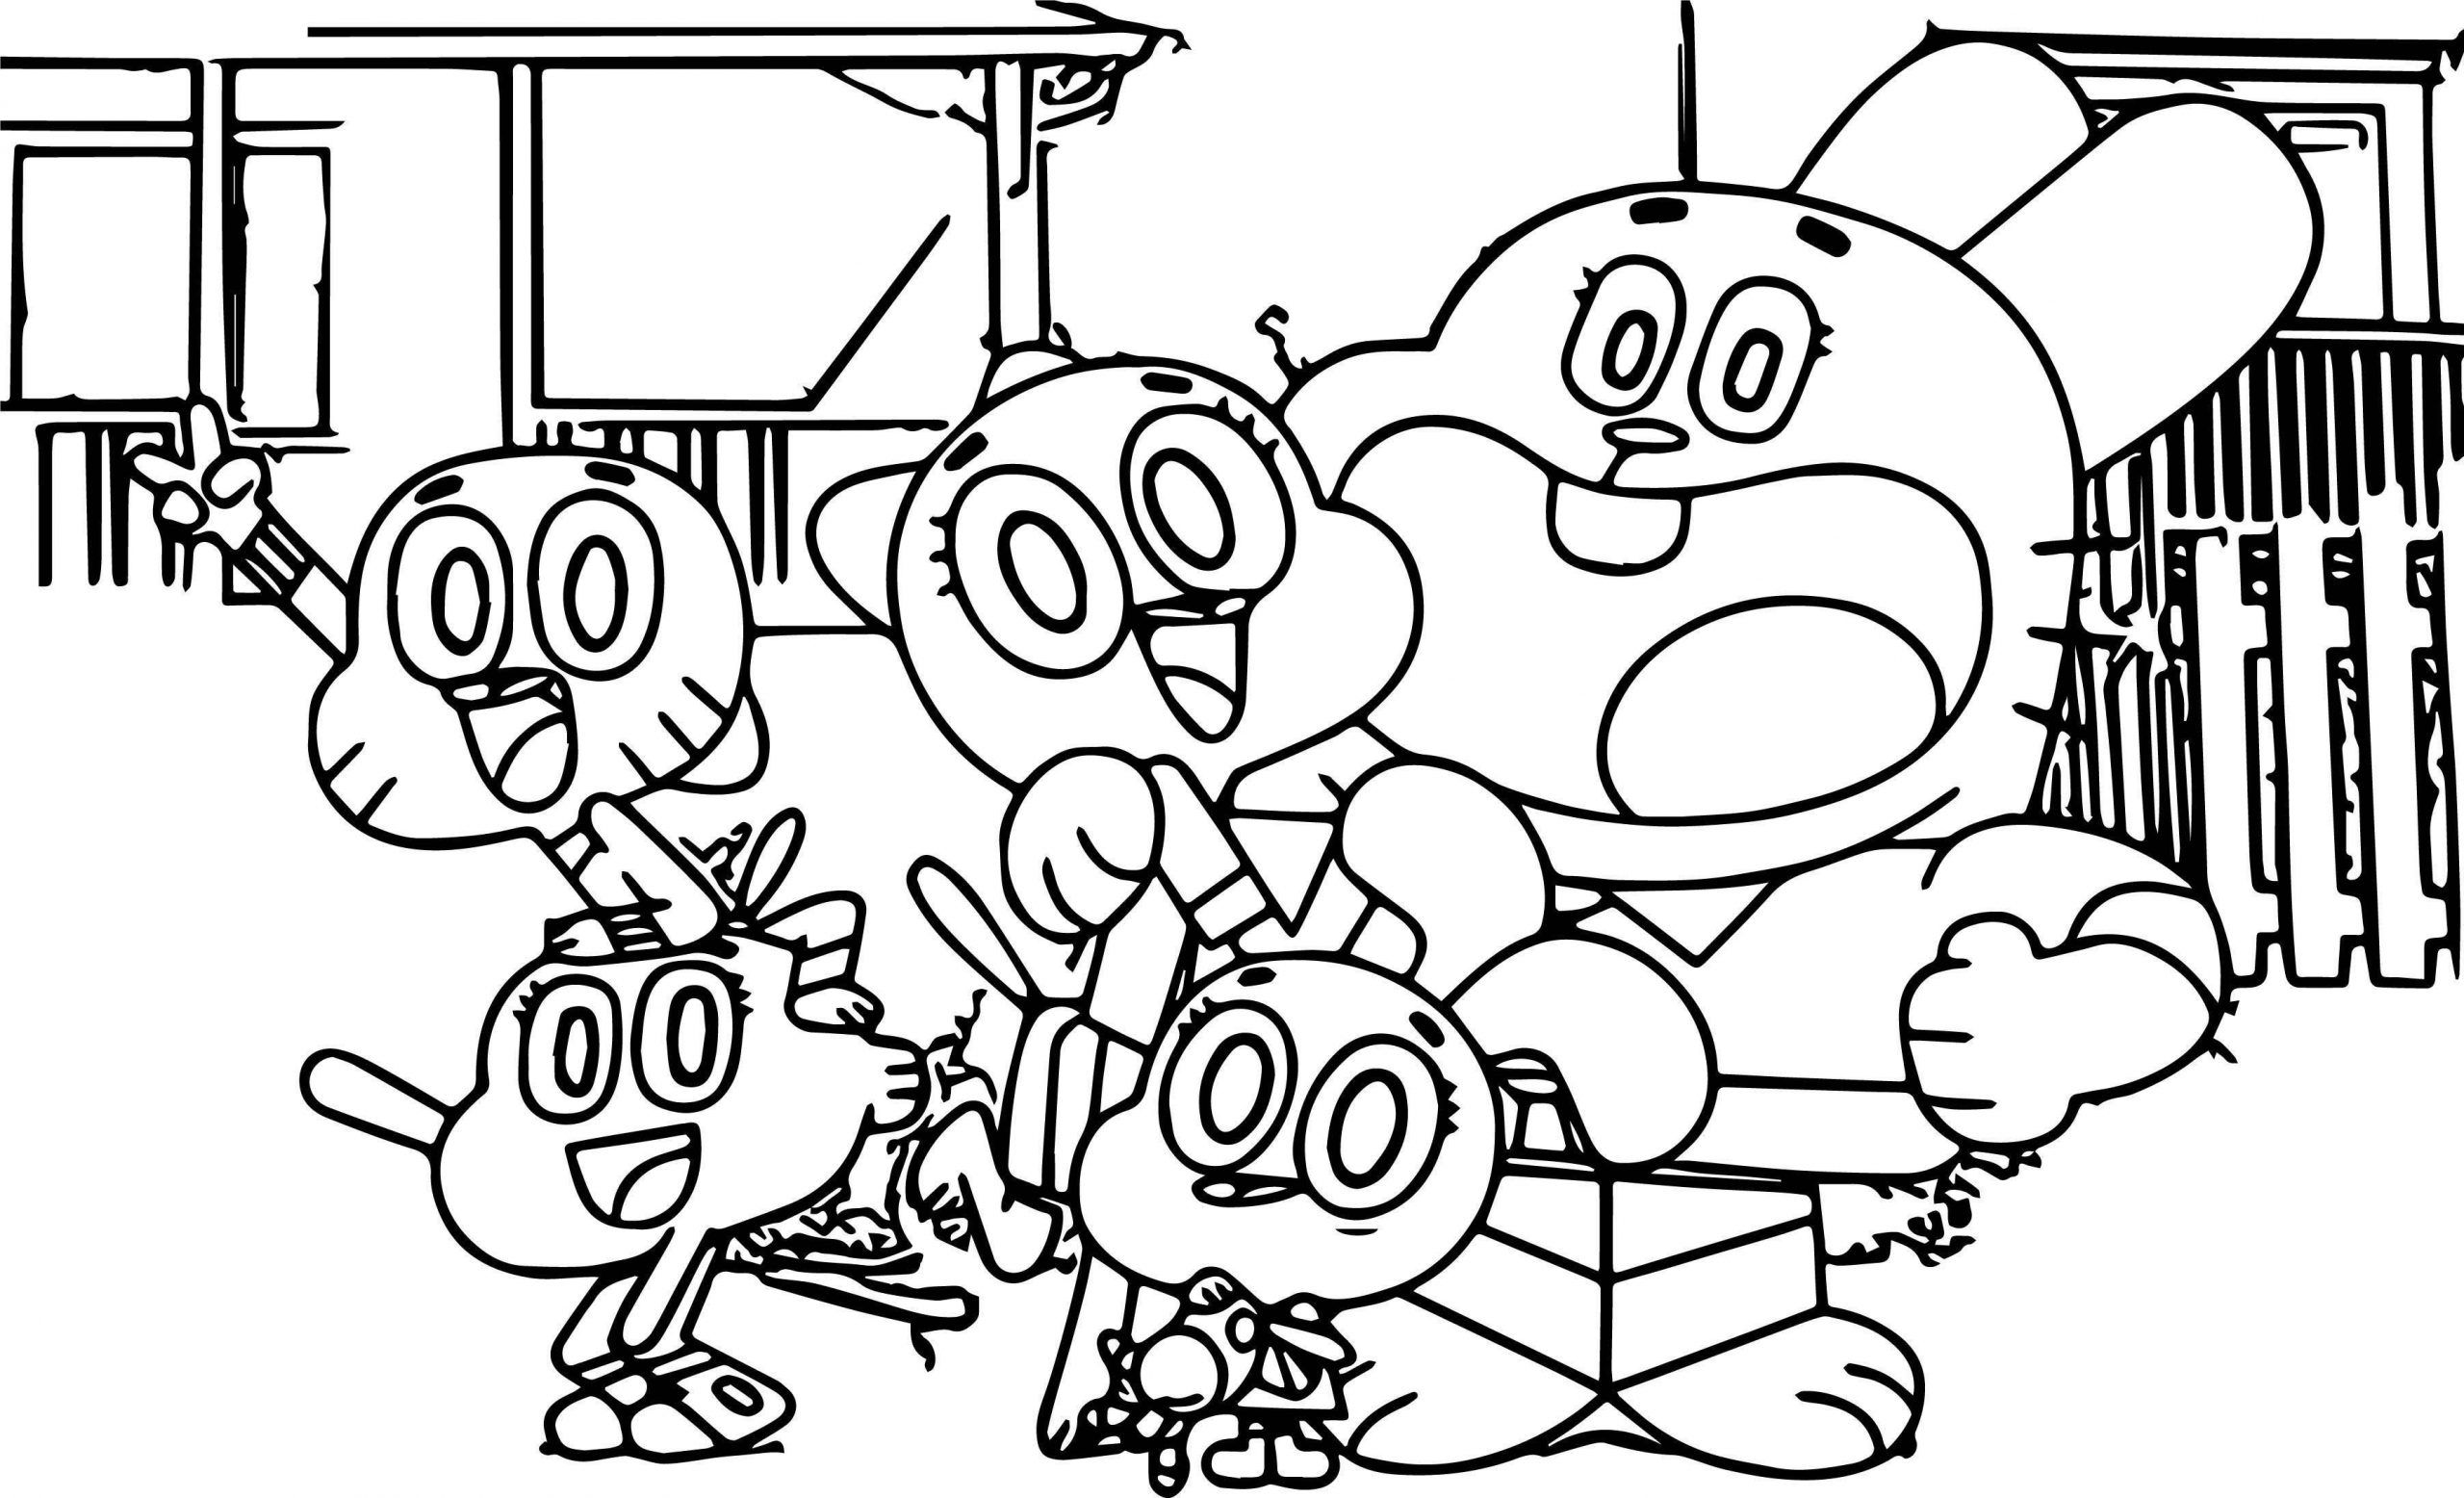 Amazing World Of Gumball Coloring Pages Pdf For Kids - Printable Amazing World Of Gumball Coloring Pages